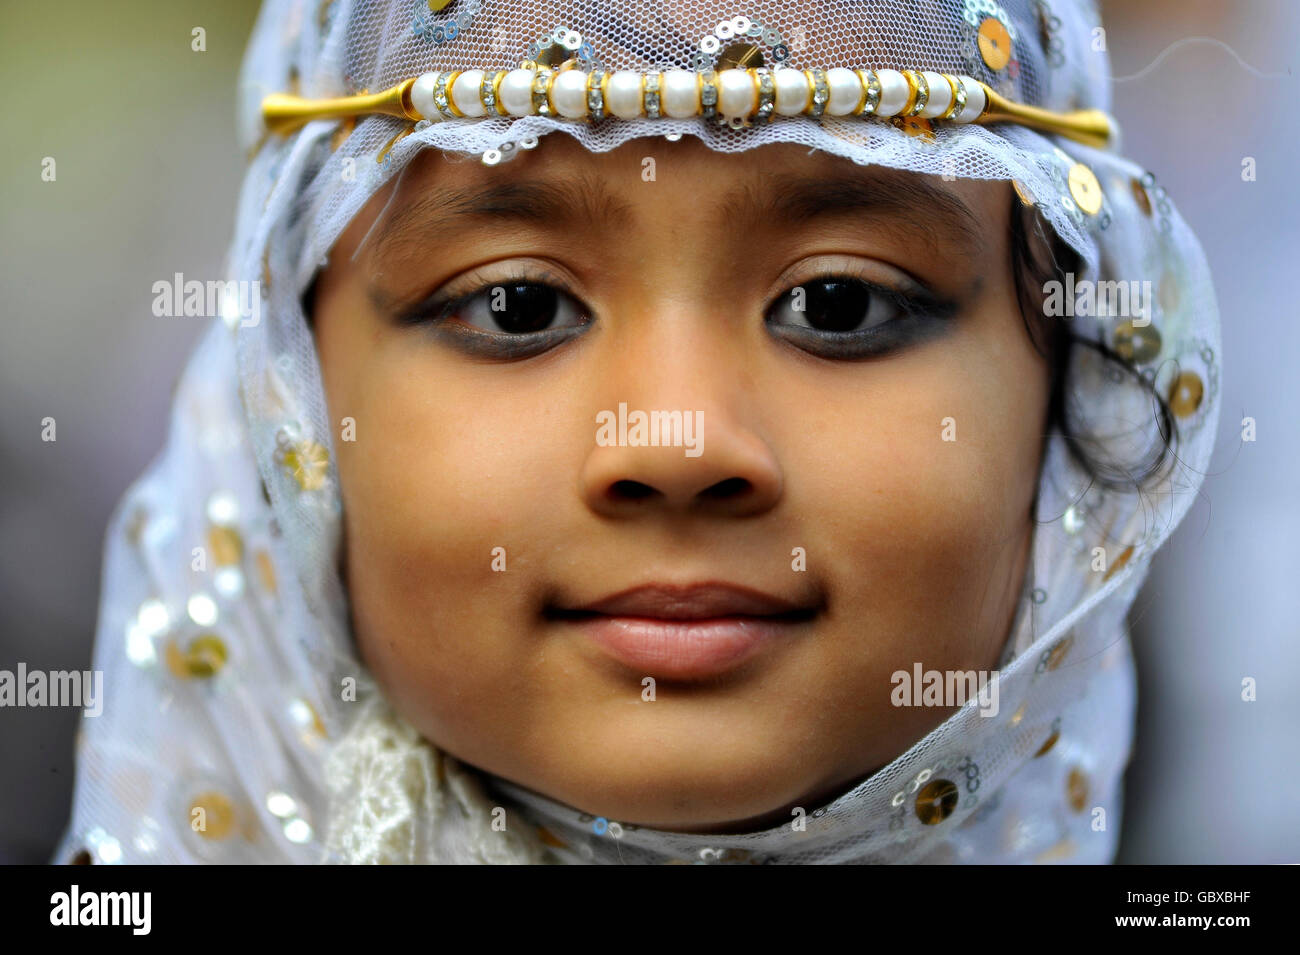 Kathmandu, Nepal. 07th July, 2016. A Potrait Mahijabin Phatma, 6.5 yrs old along with her parents come offer ritual morning prayers during celebration of Eid al-Fitr on July 7, 2016 in Kashmire Jame Mosques, Kathmandu, Nepal by attending special prayers in mosques, exchanging greetings with each other, wearing new clothes and eating a variety of dishes. Eid is celebrated as the conclusion of Ramadan's month-long dawn-to-sunset fasting. Nepalese goverment announced a public holiday for EID Celebration. Credit:  Narayan Maharjan/Pacific Press/Alamy Live News Stock Photo